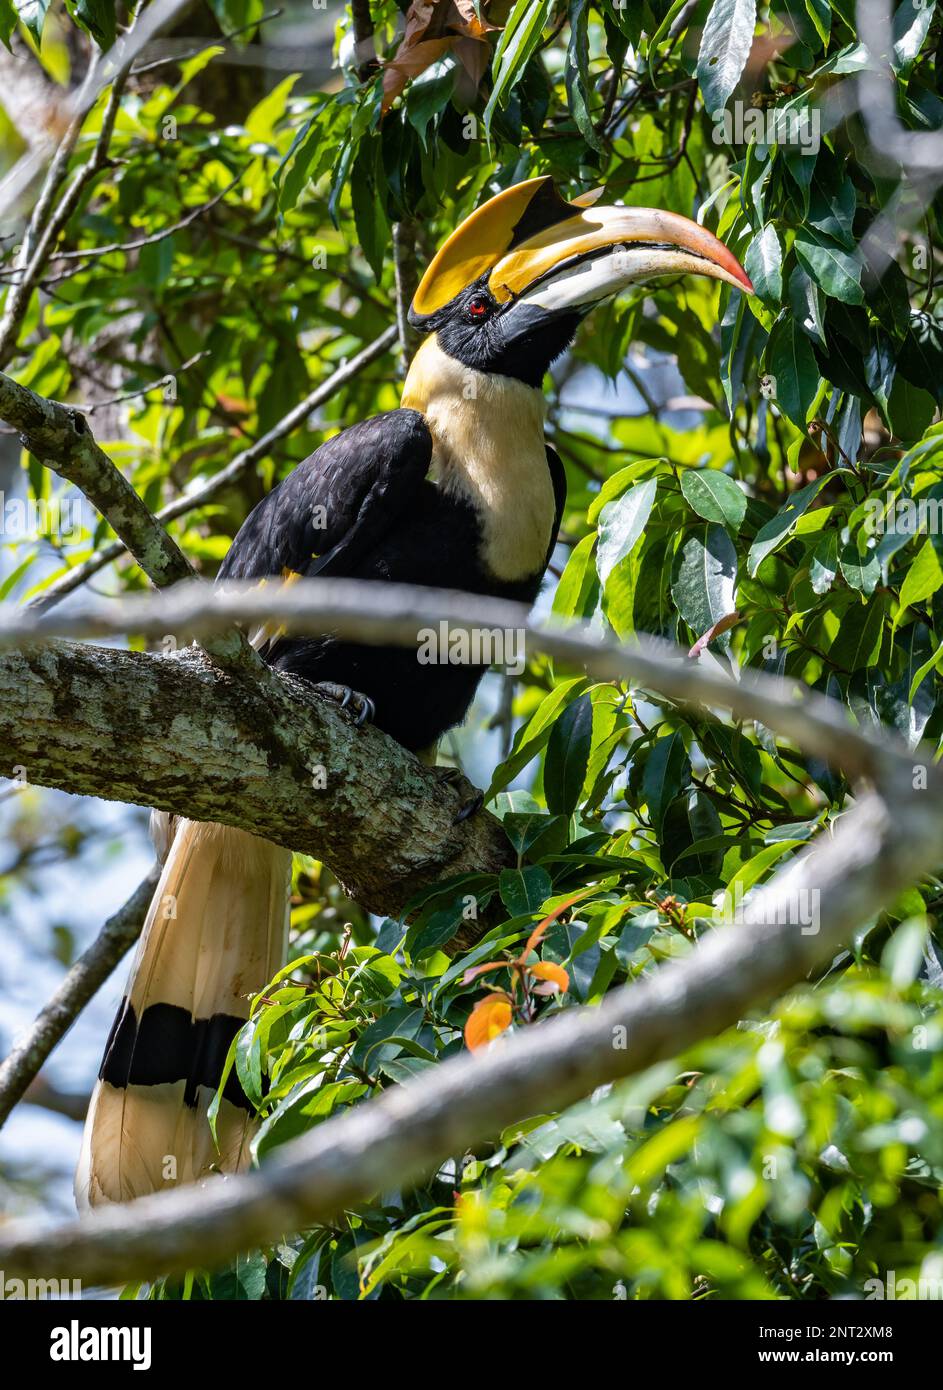 A wild Great Hornbill (Buceros bicornis) perched on a tree. Thailand. Stock Photo